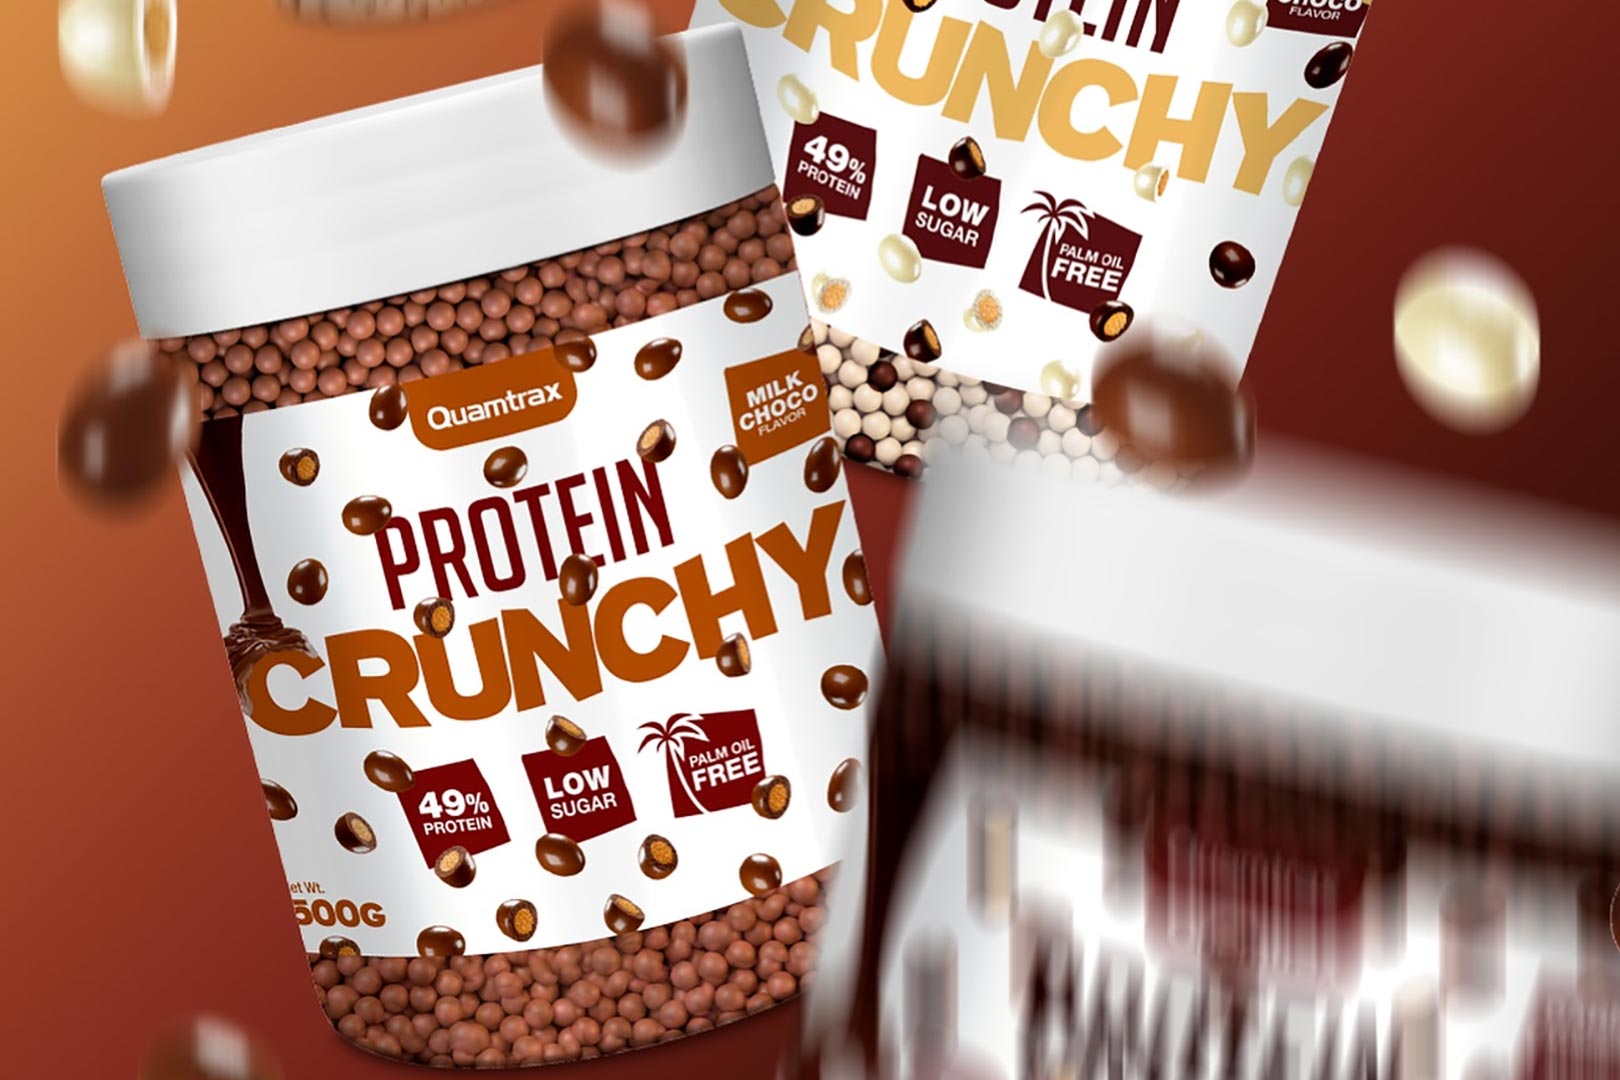 Quamtrax Protein Crunchy